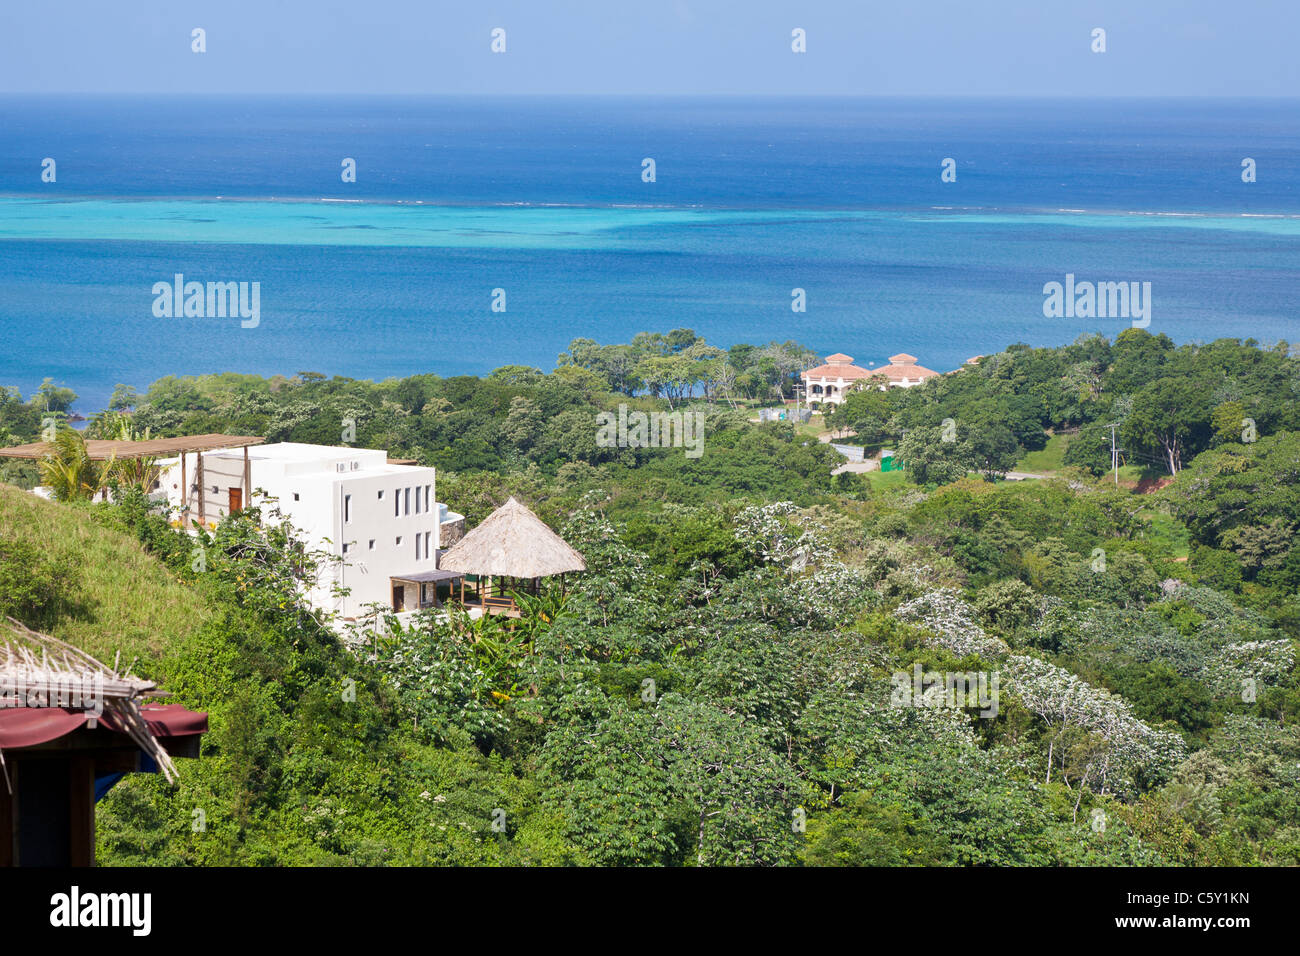 Building with straw roof on green hillside overlooking the Caribbean Sea on the island of Roatan, in Honduras Stock Photo